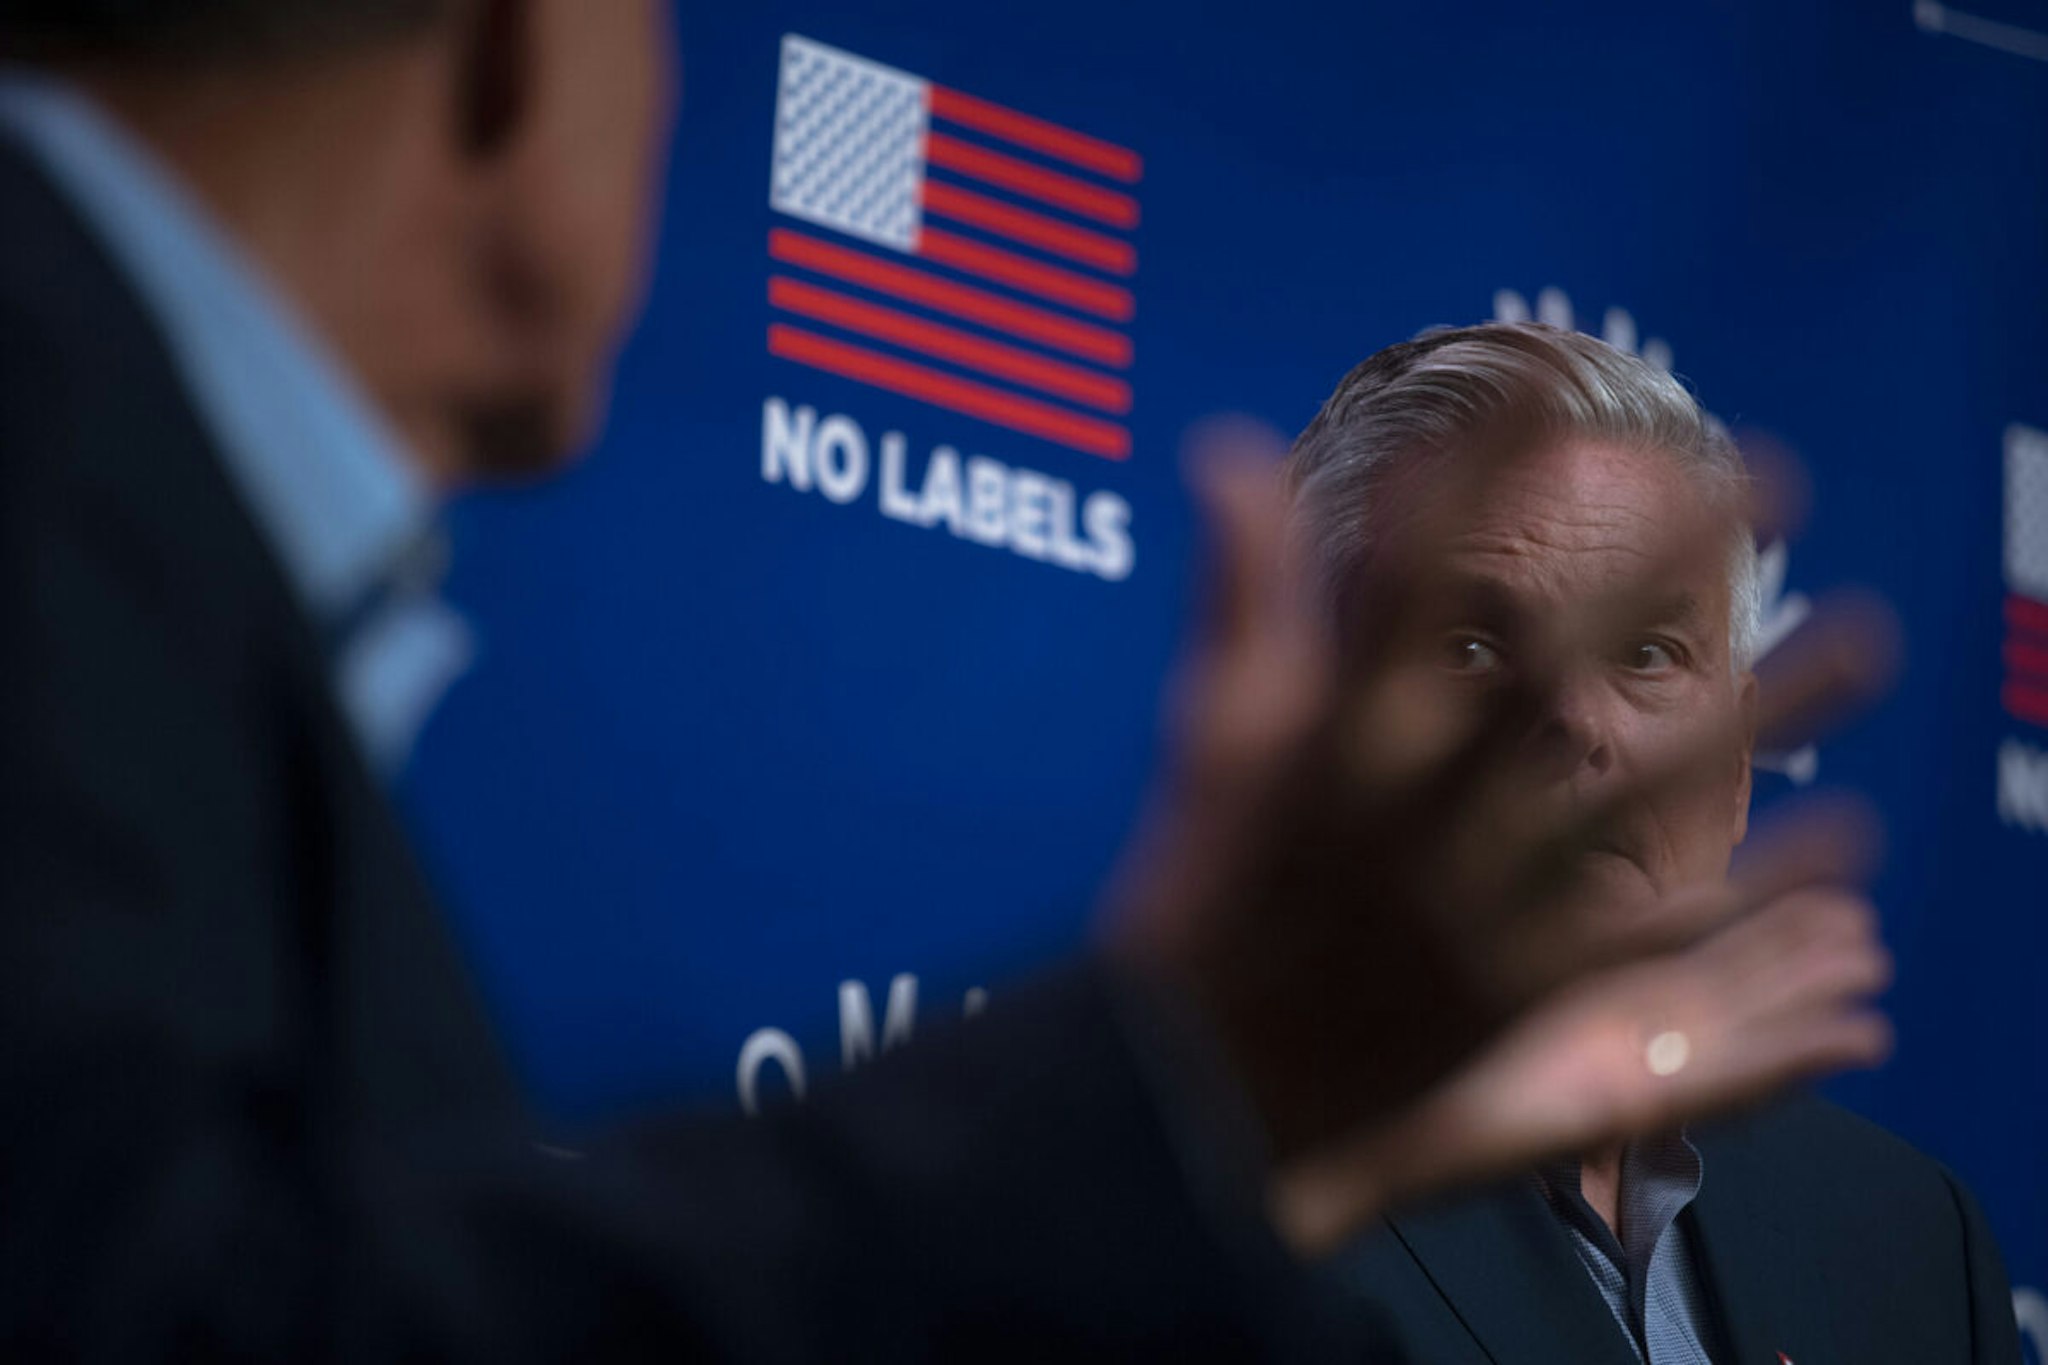 Former Utah governor Jon Huntsman (R) was co-headliner along with Sen. Joe Manchin III (D-W.Va.) at the 'Common Sense' Town Hall, an event sponsored by the bipartisan group No Labels, held on Monday evening, July 17, 2023 at St. Anselm College in Manchester, New Hampshire.